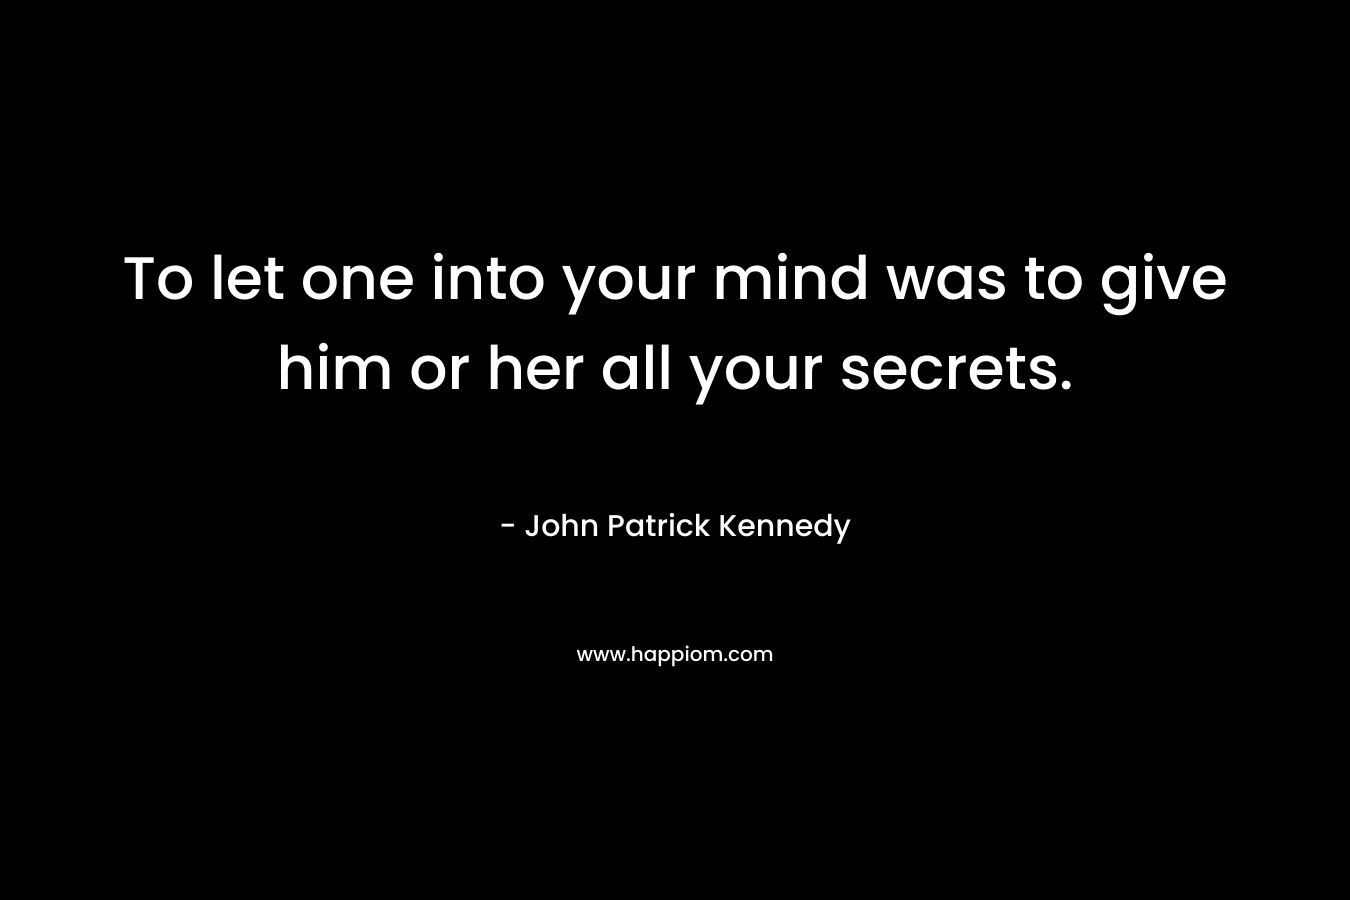 To let one into your mind was to give him or her all your secrets.